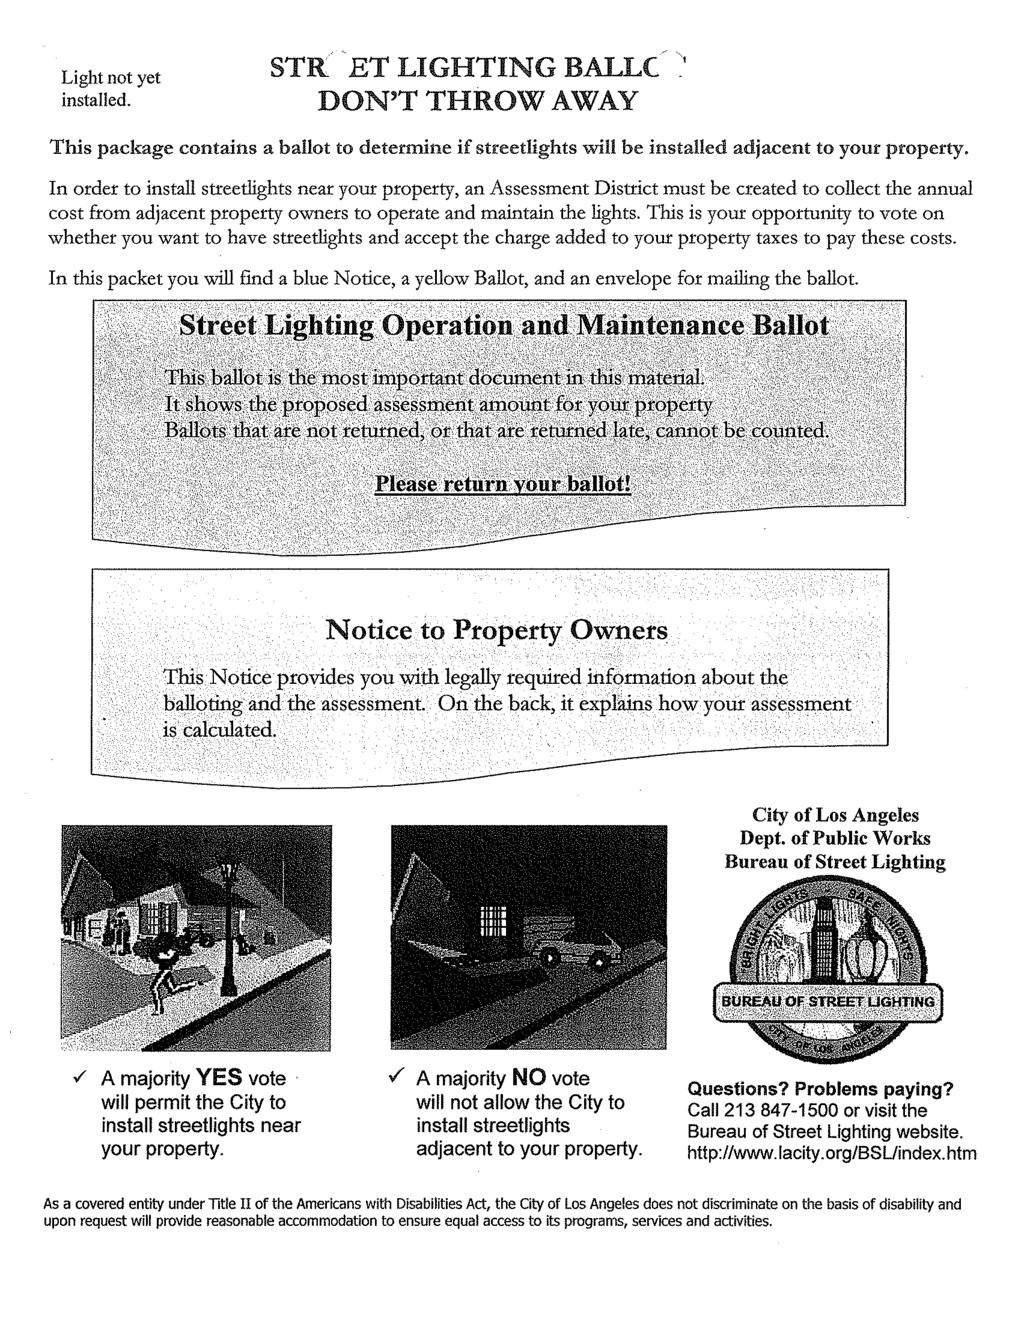 Light not yet installed. STR 'ET LIGHTING BALLe ""0, DON'T THROWAWAY This package contains a ballot to determine if streetlights will be installed adjacent to your property.